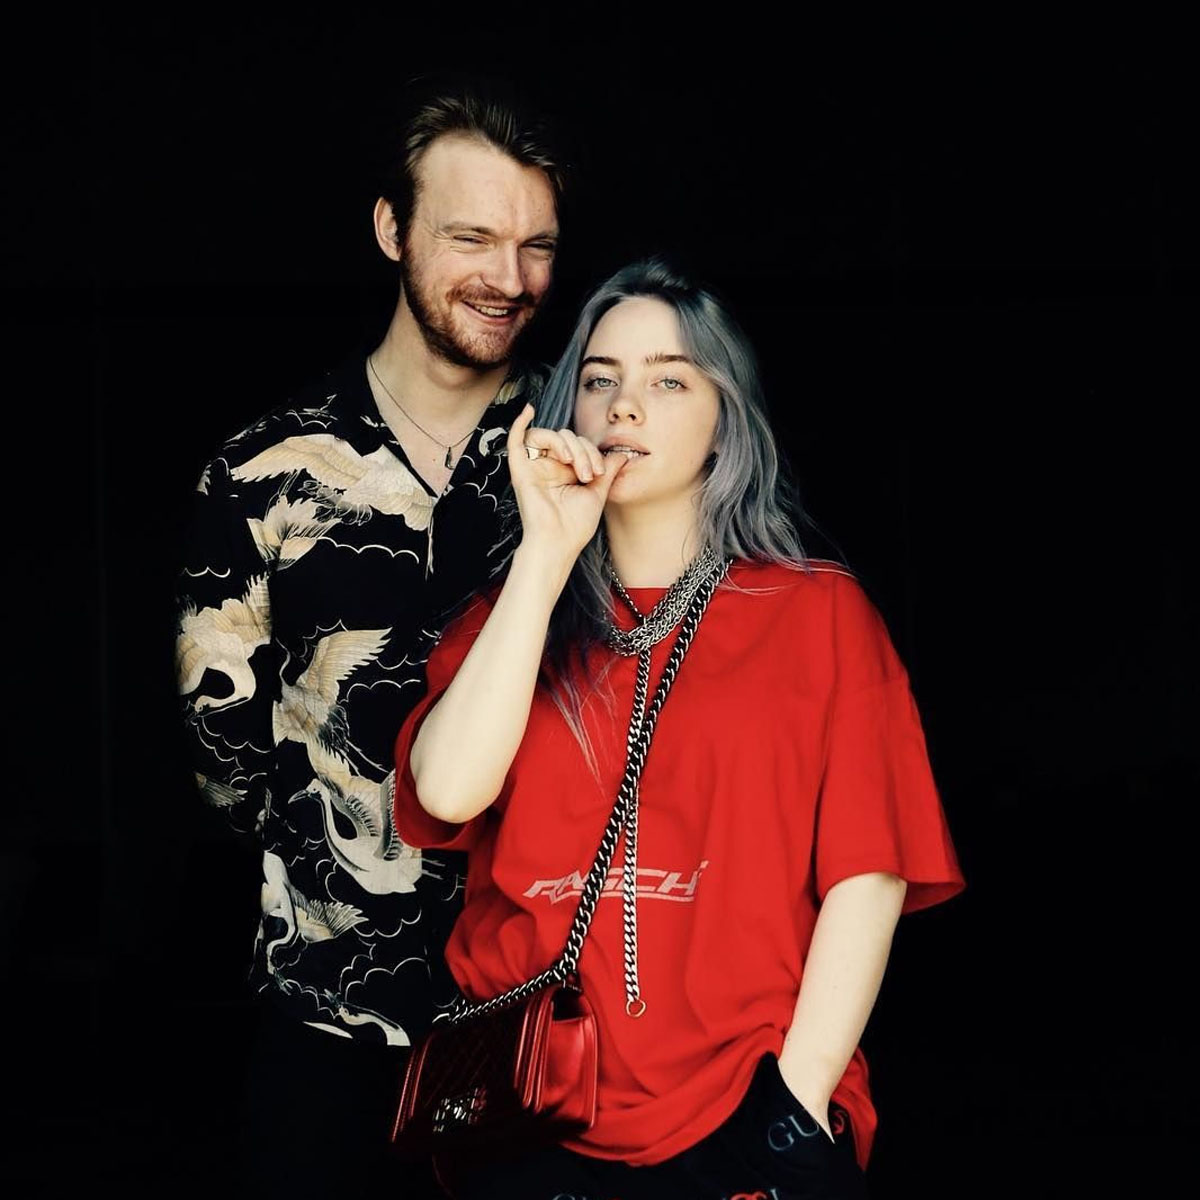 Phineas O'Connell and Billie Eilish